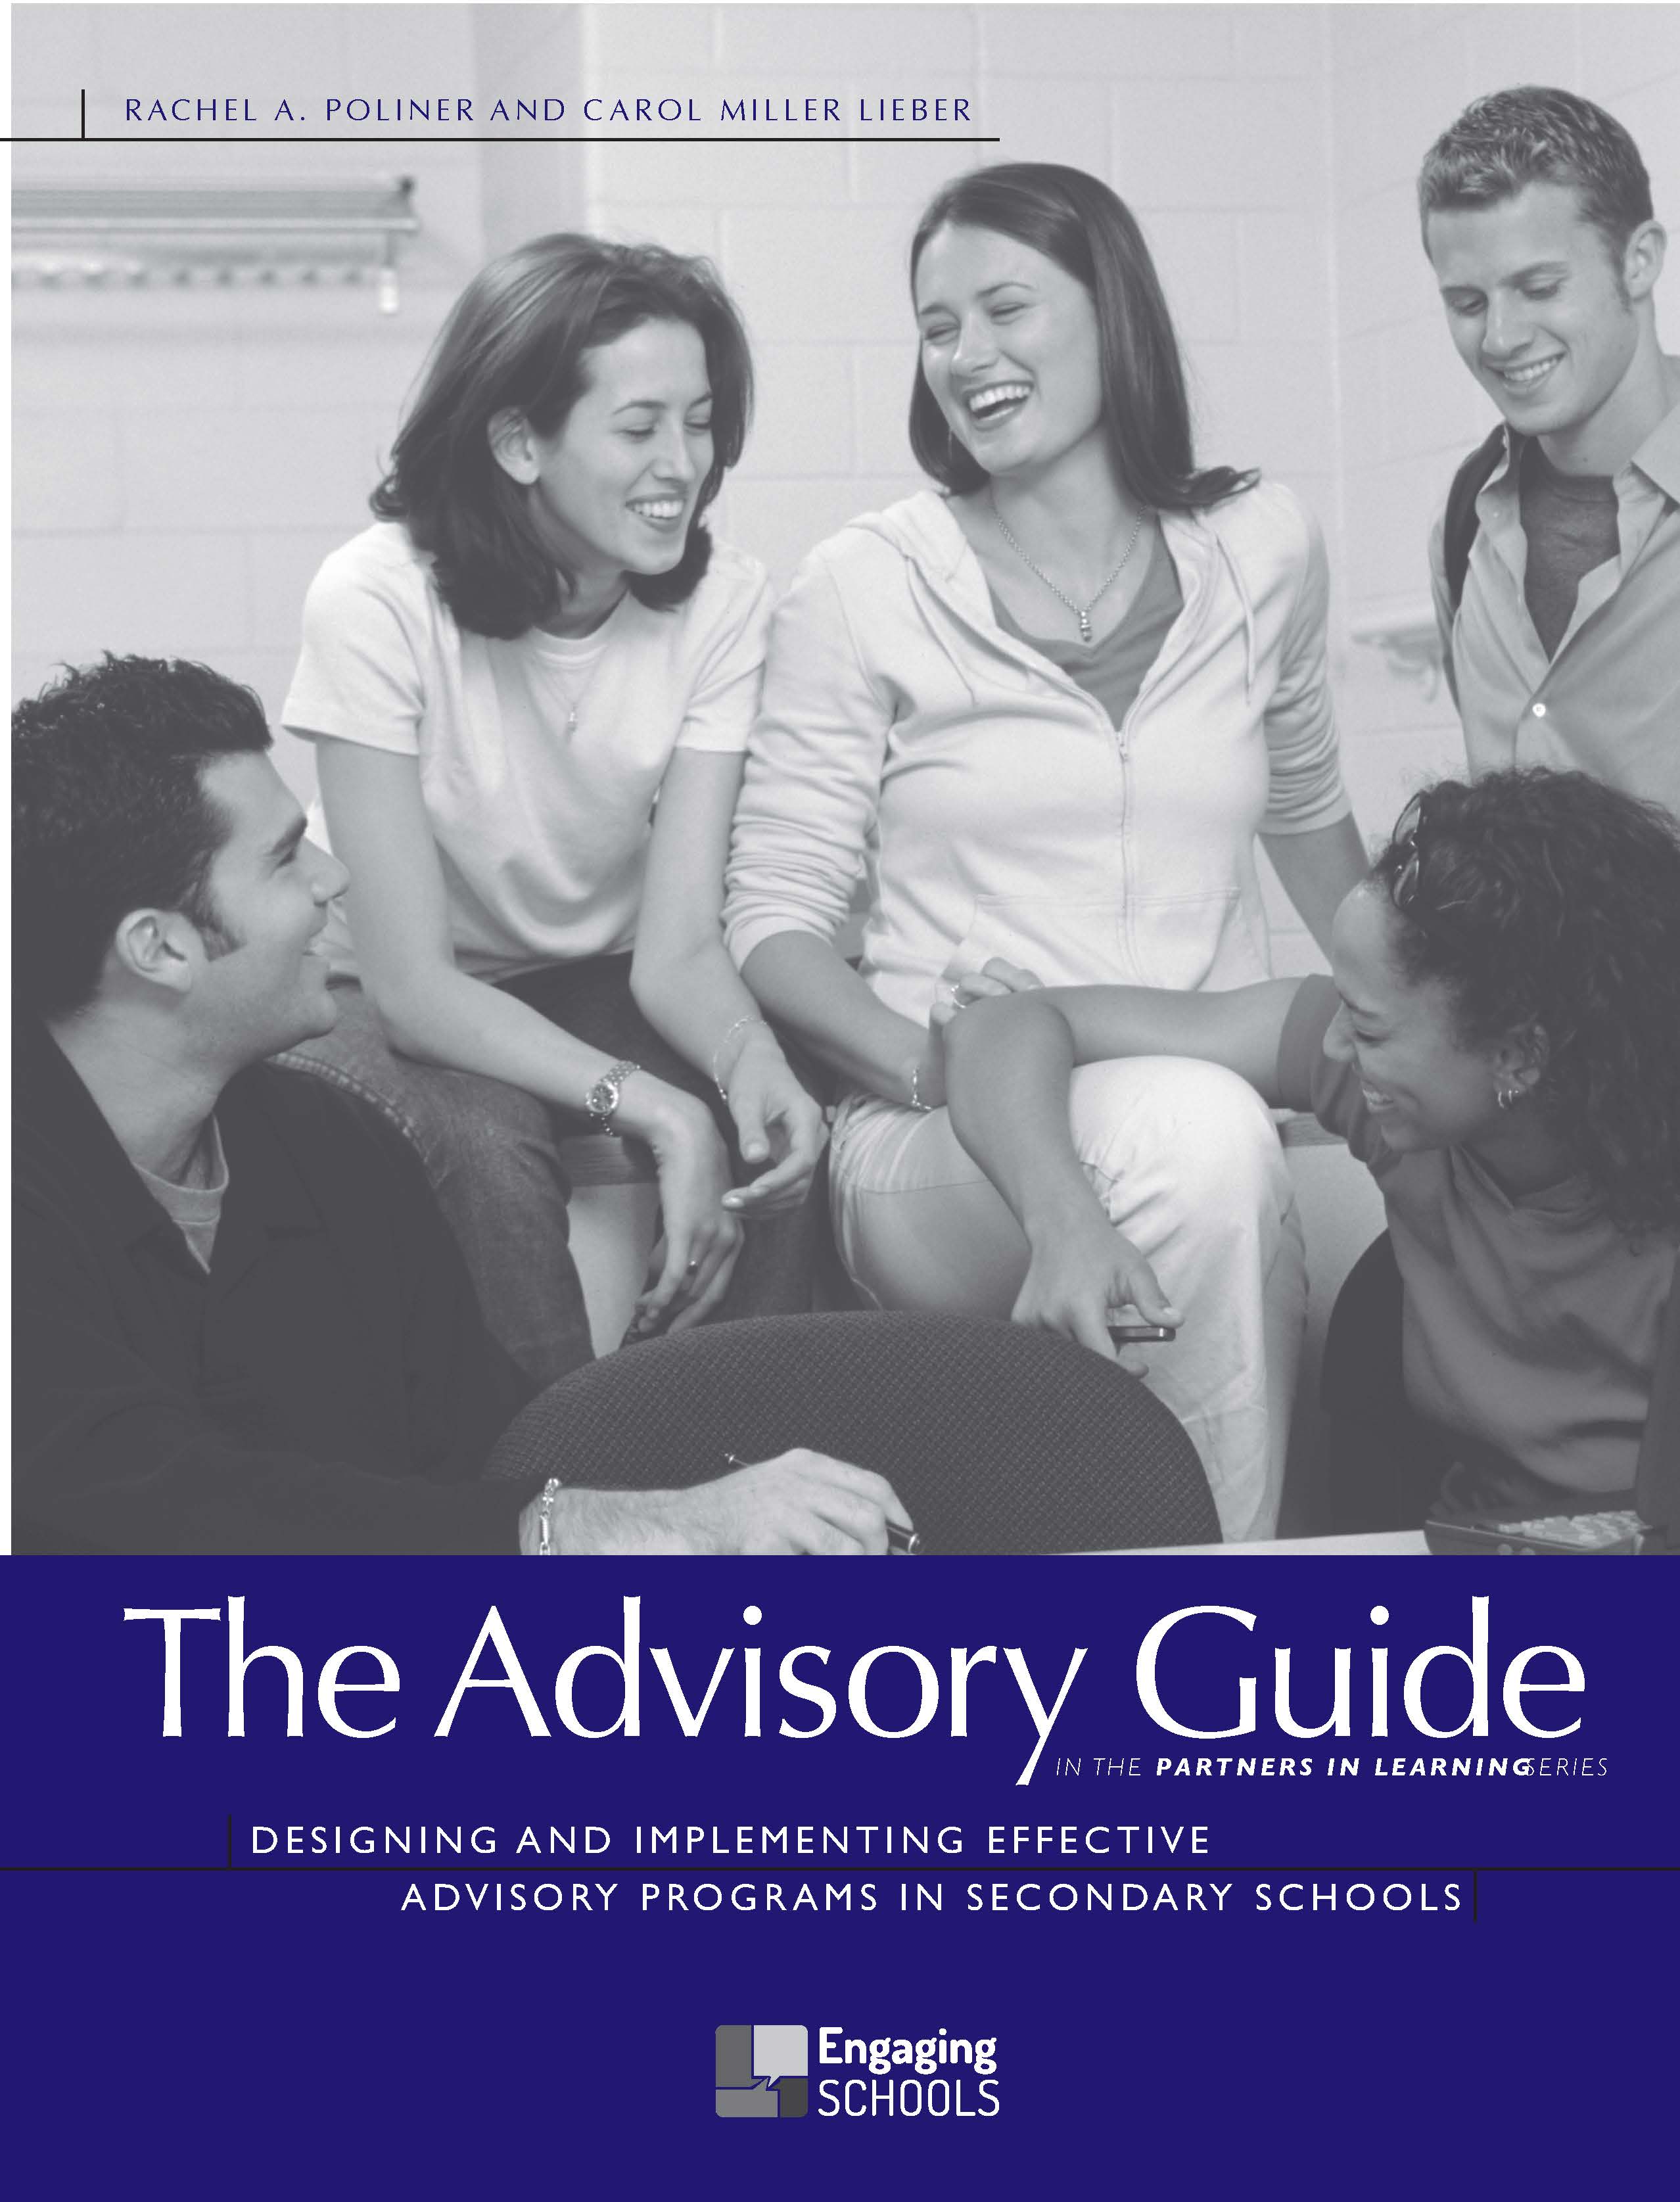 The Advisory Guide: Designing and Implementing Effective Advisory Programs in Secondary Schools (ADVISO)